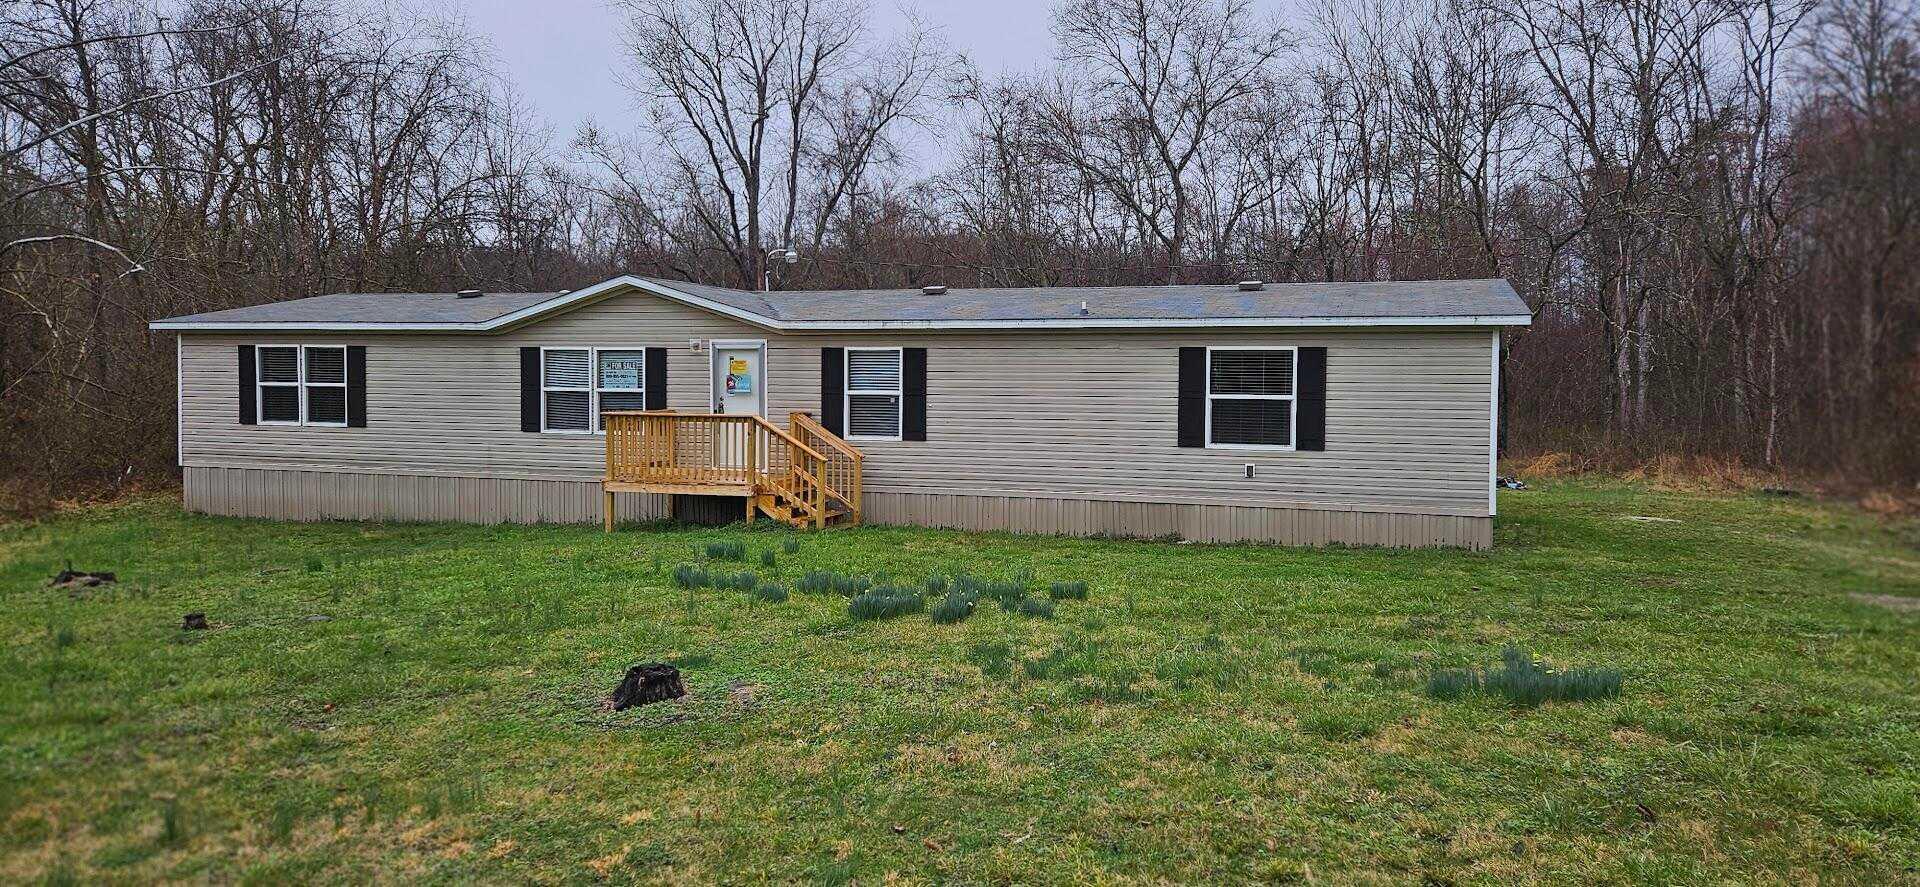 32 Kenneth Barrett, 24004450, Booneville, Single Family Residence,  for sale, Hand In Hand Realty